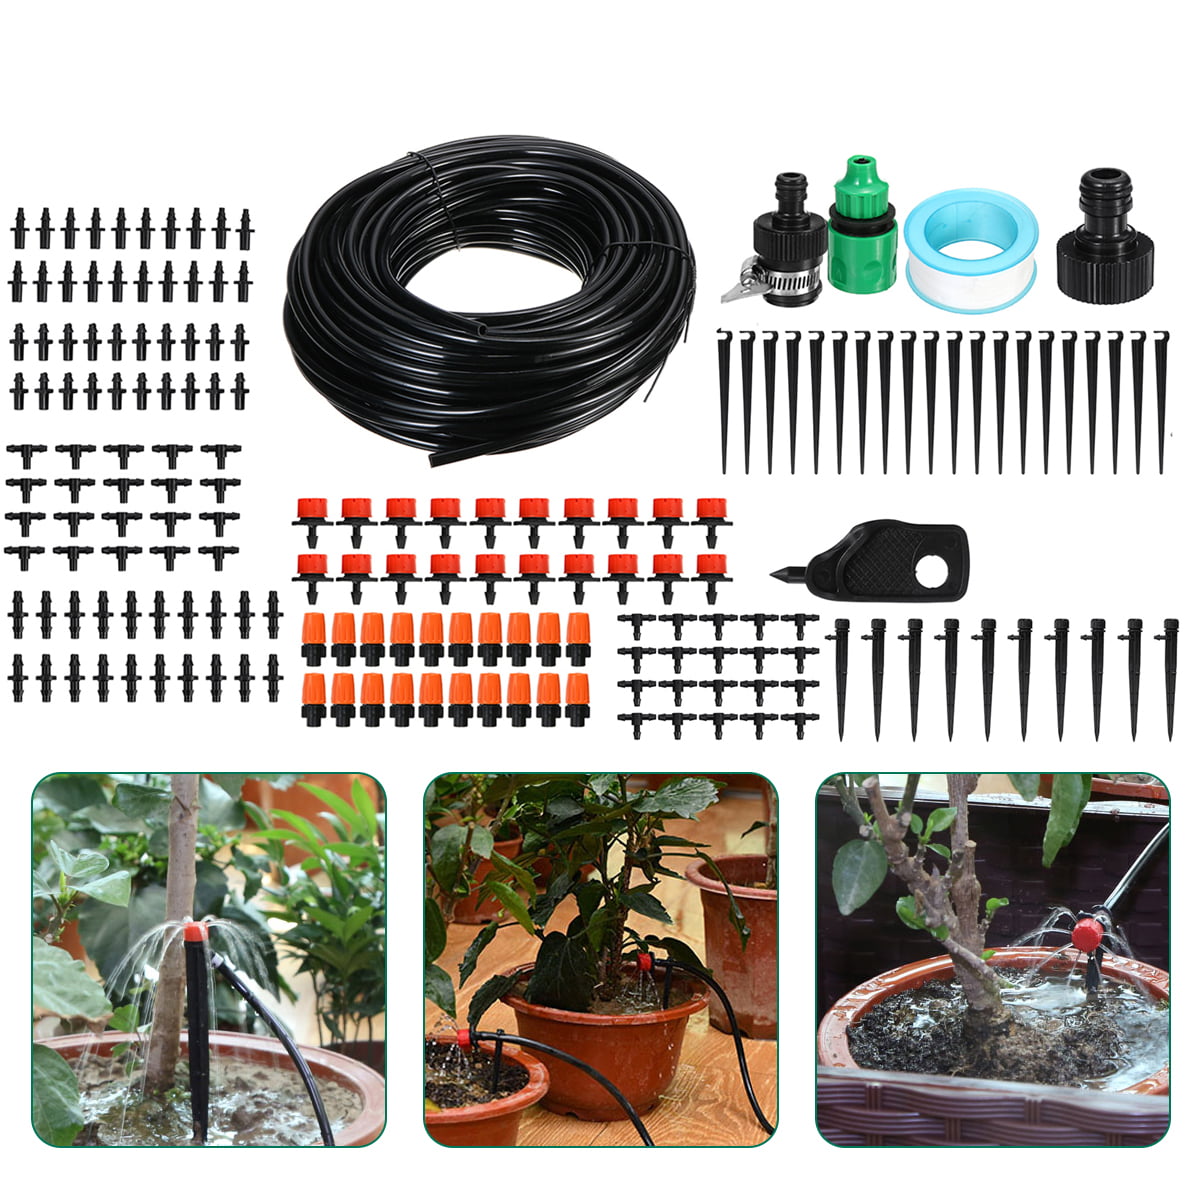 for Garden Home Indoor Outdoor Shujin Drip Irrigation Kit 12PCS 12Pcs Automatic Plant Sprinklers With Valves Drip Irrigation System Regulating Controllable Devices